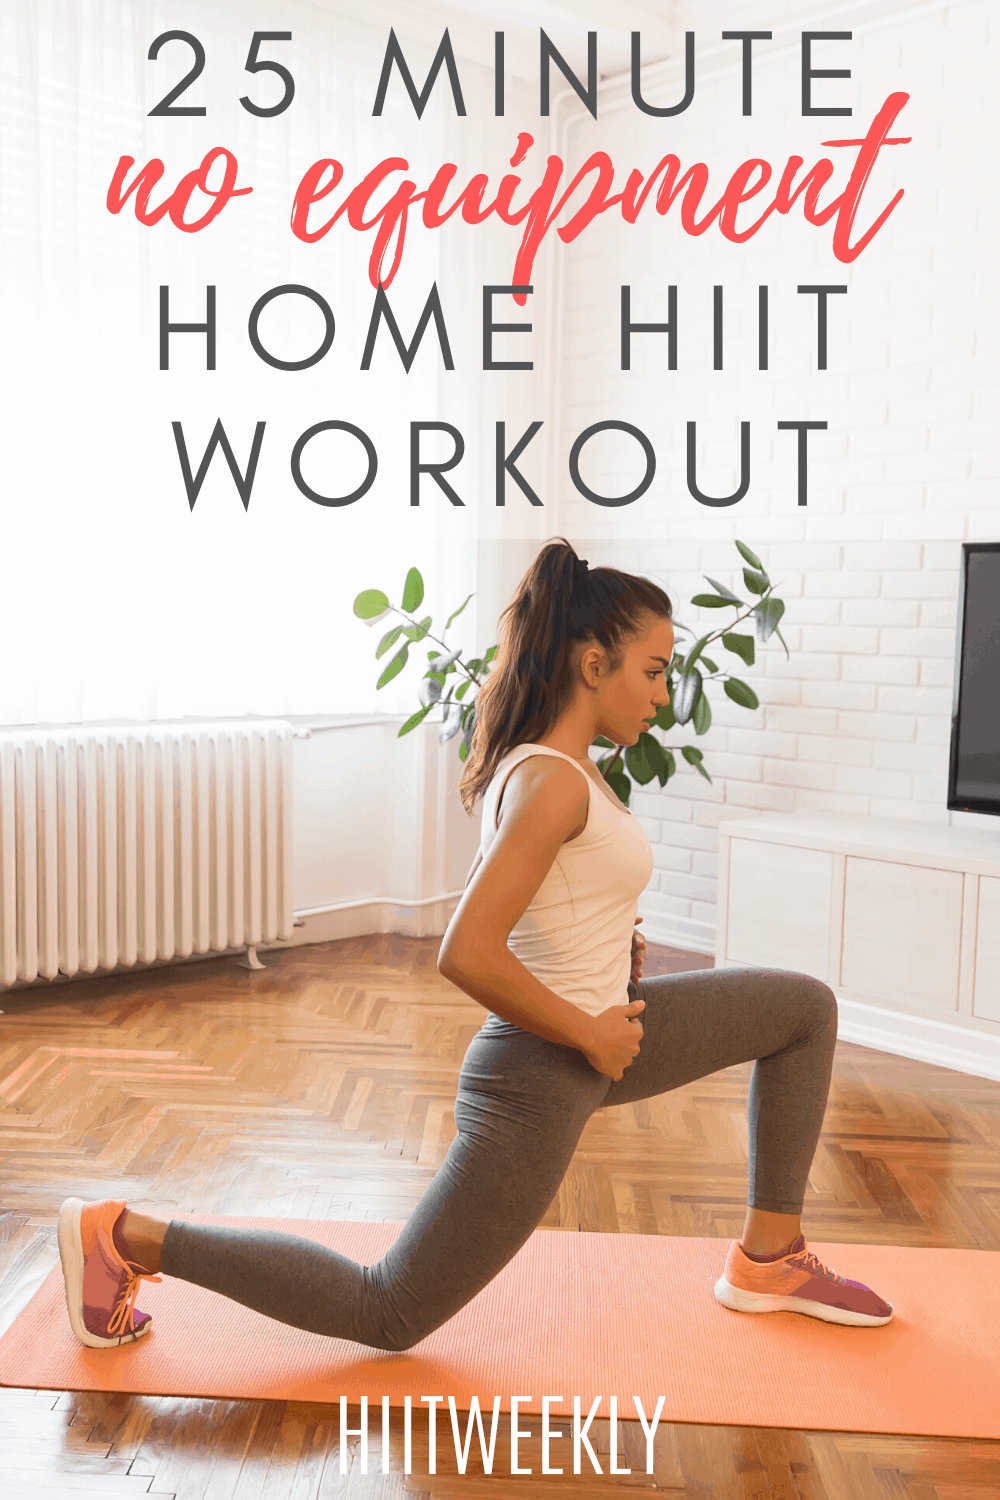 Sweaty 25 Minute No Equipment Hiit Workout For Fat Loss Hiit Weekly